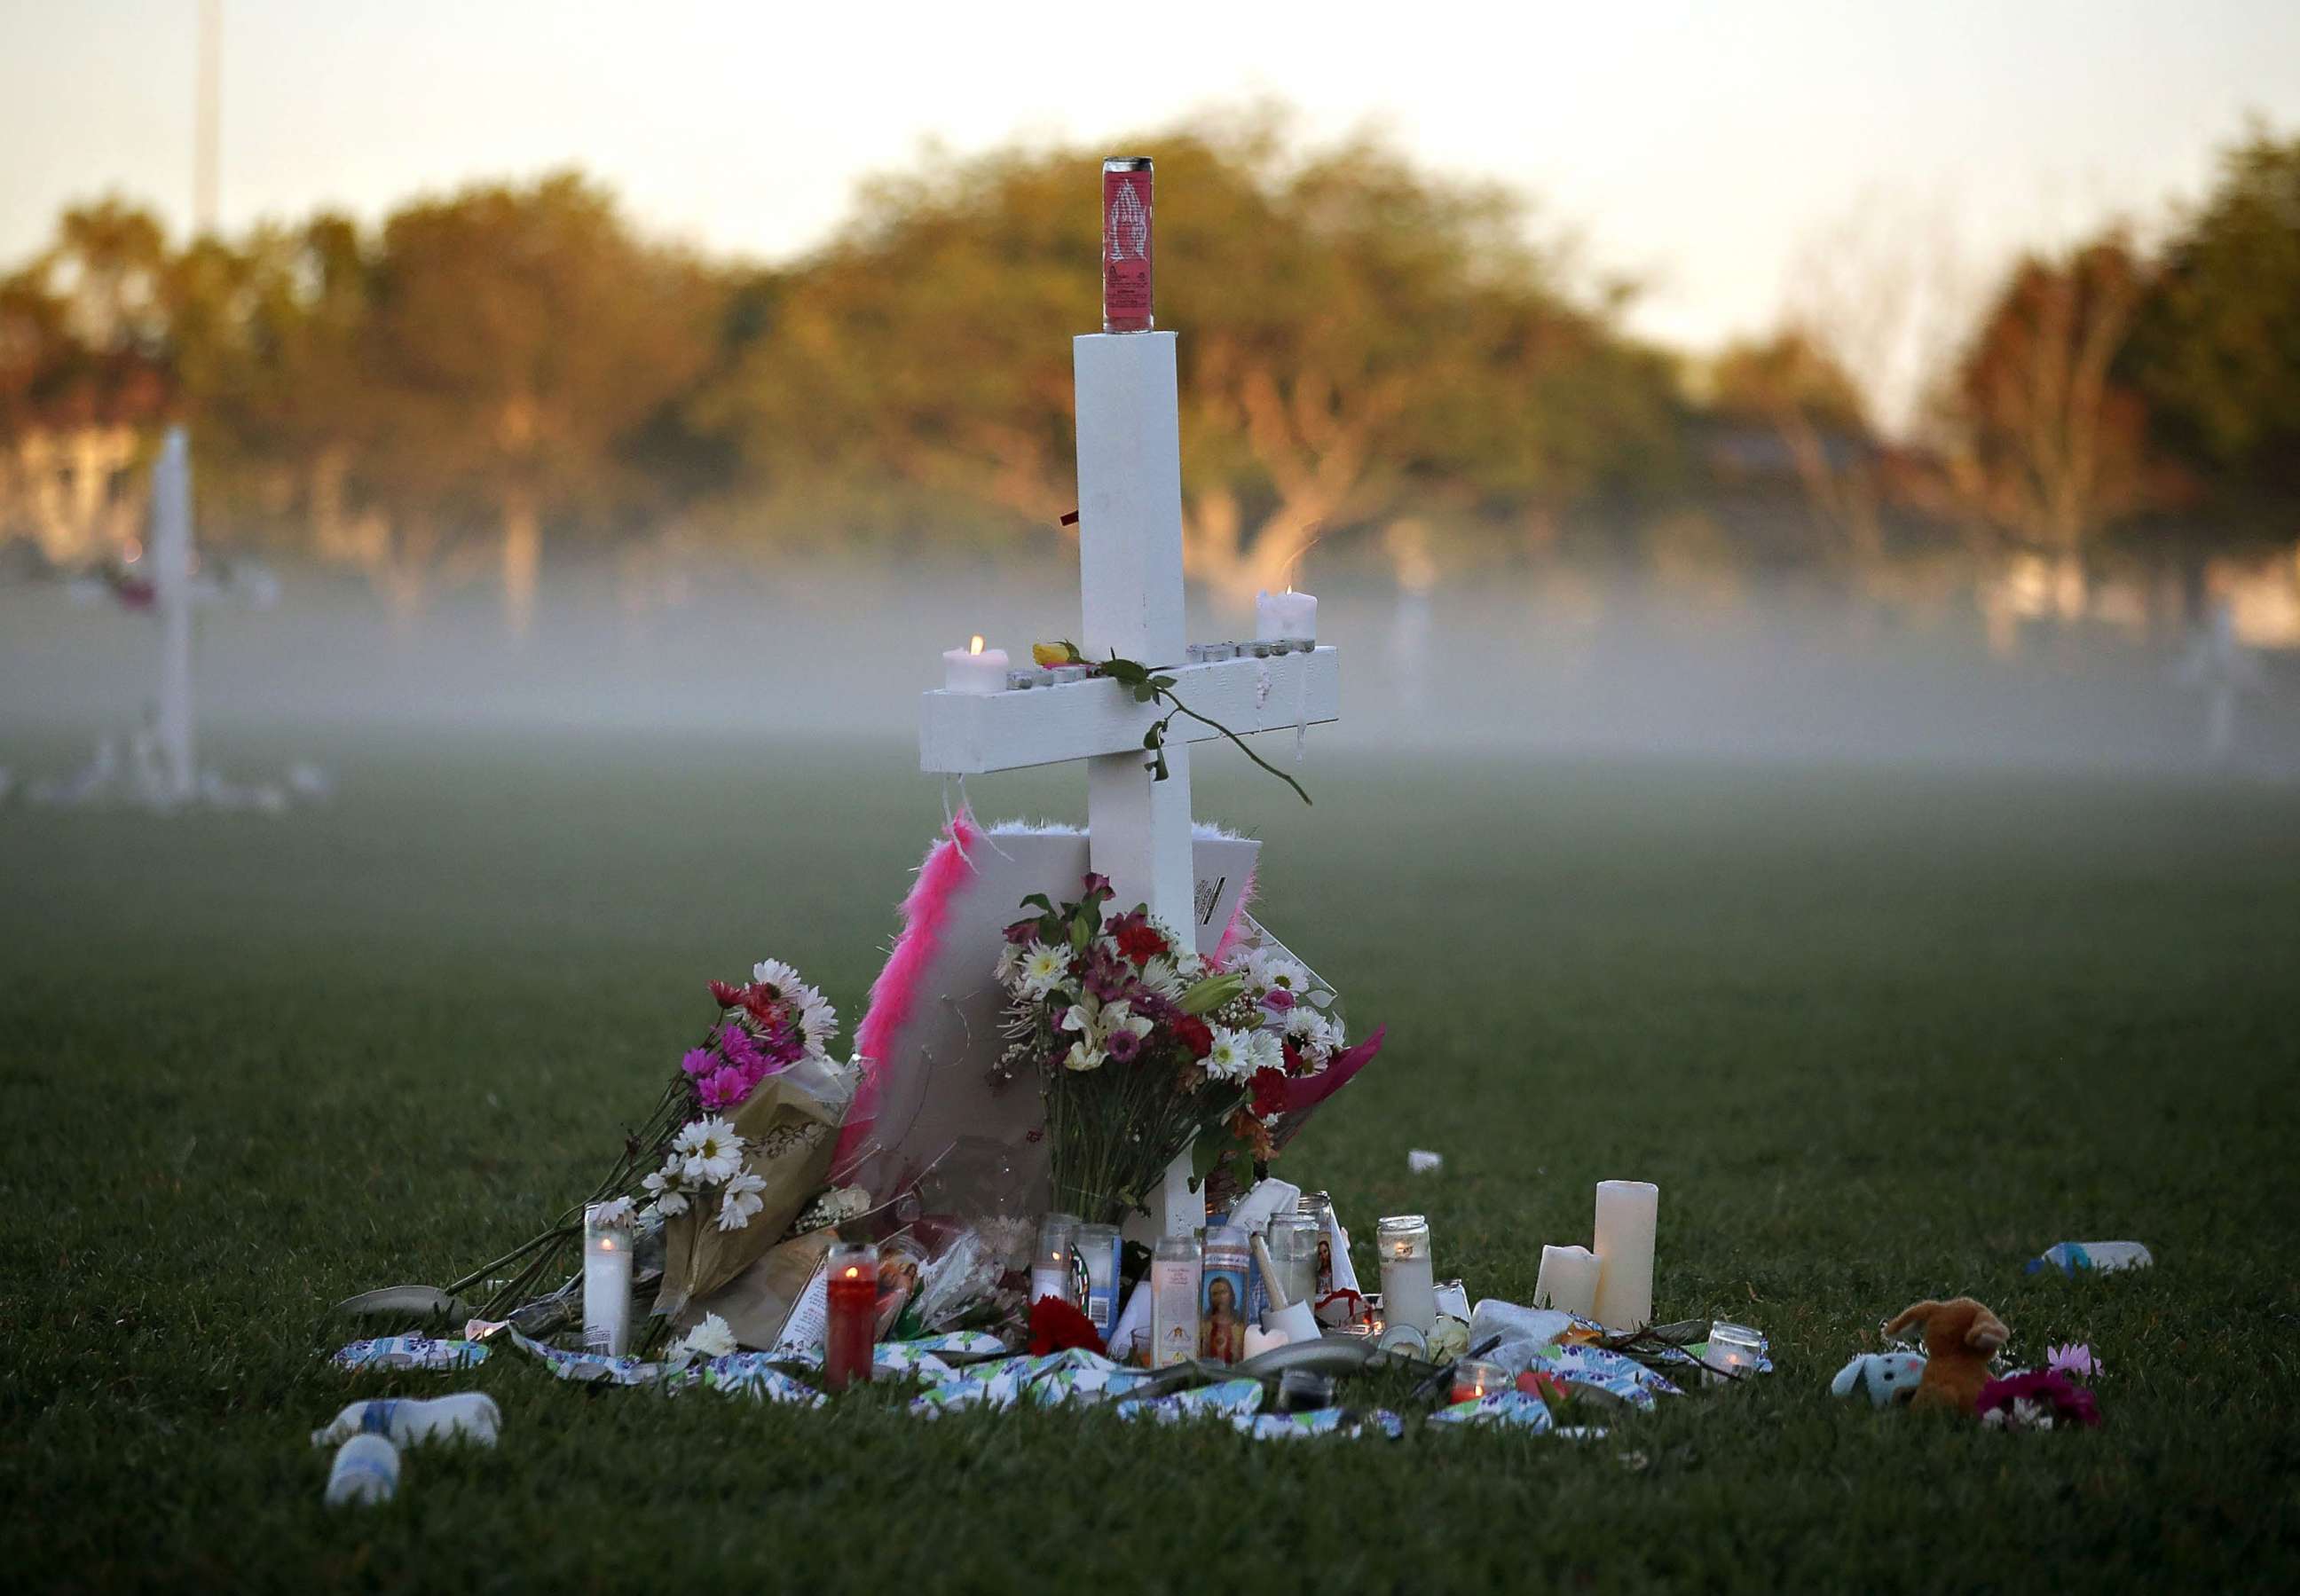 PHOTO:FILE PHOTO: Candles rest on a cross after a nighttime vigil for victims of the Feb. 14, 2018 mass shooting at Marjory Stoneman Douglas High School, at Pine Trail Park, on Feb. 16, in Parkland, Fla.